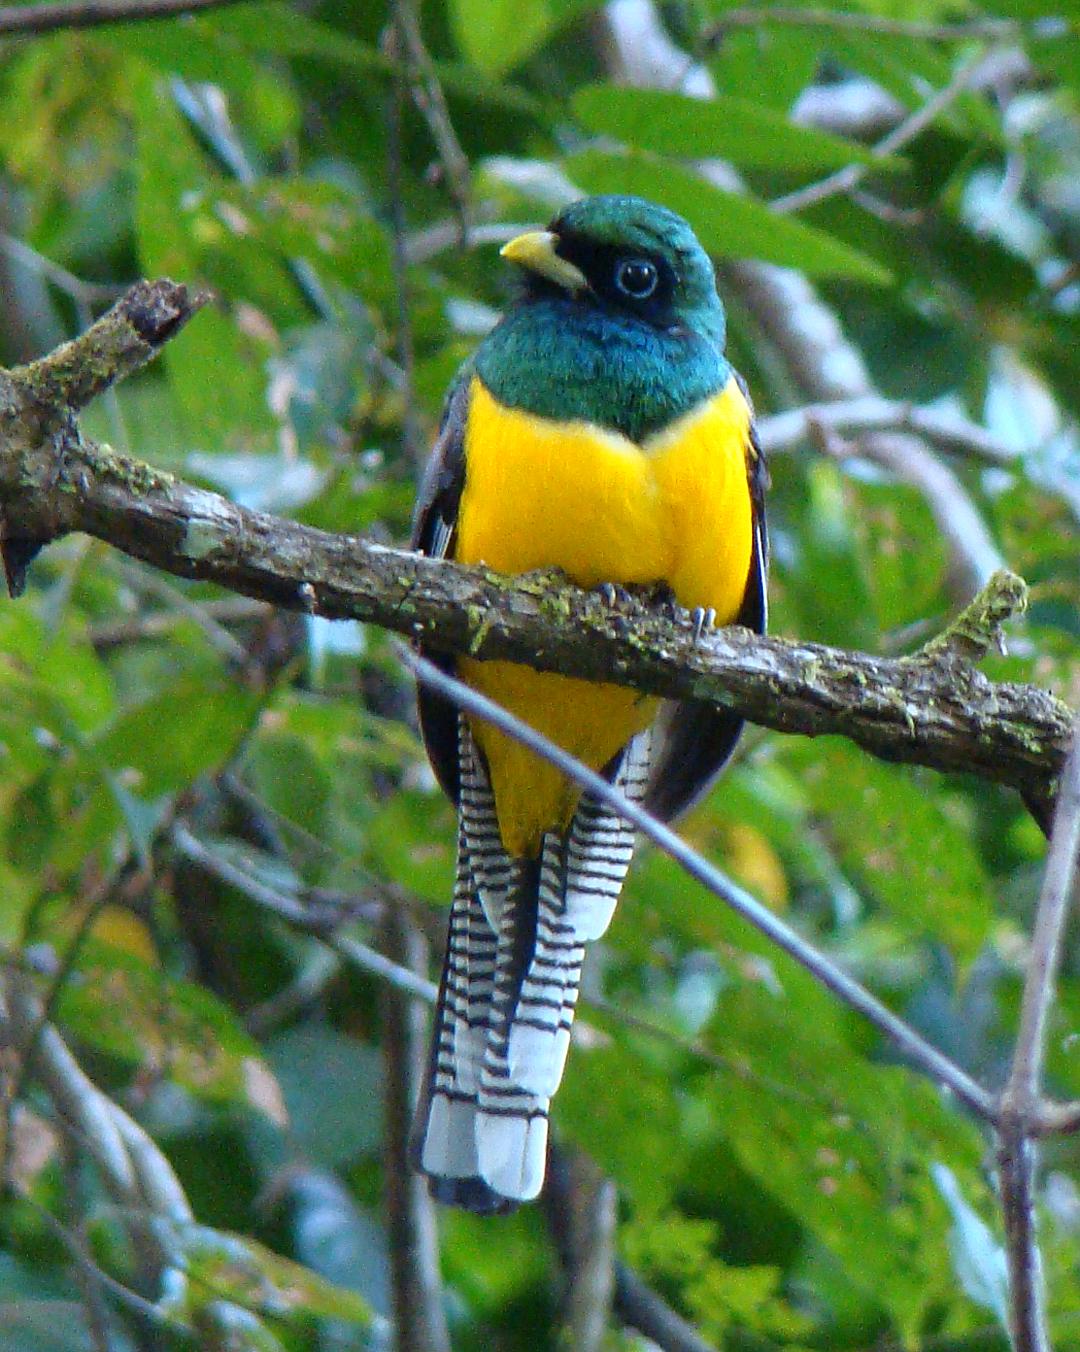 Black-throated Trogon Photo by Robert Behrstock